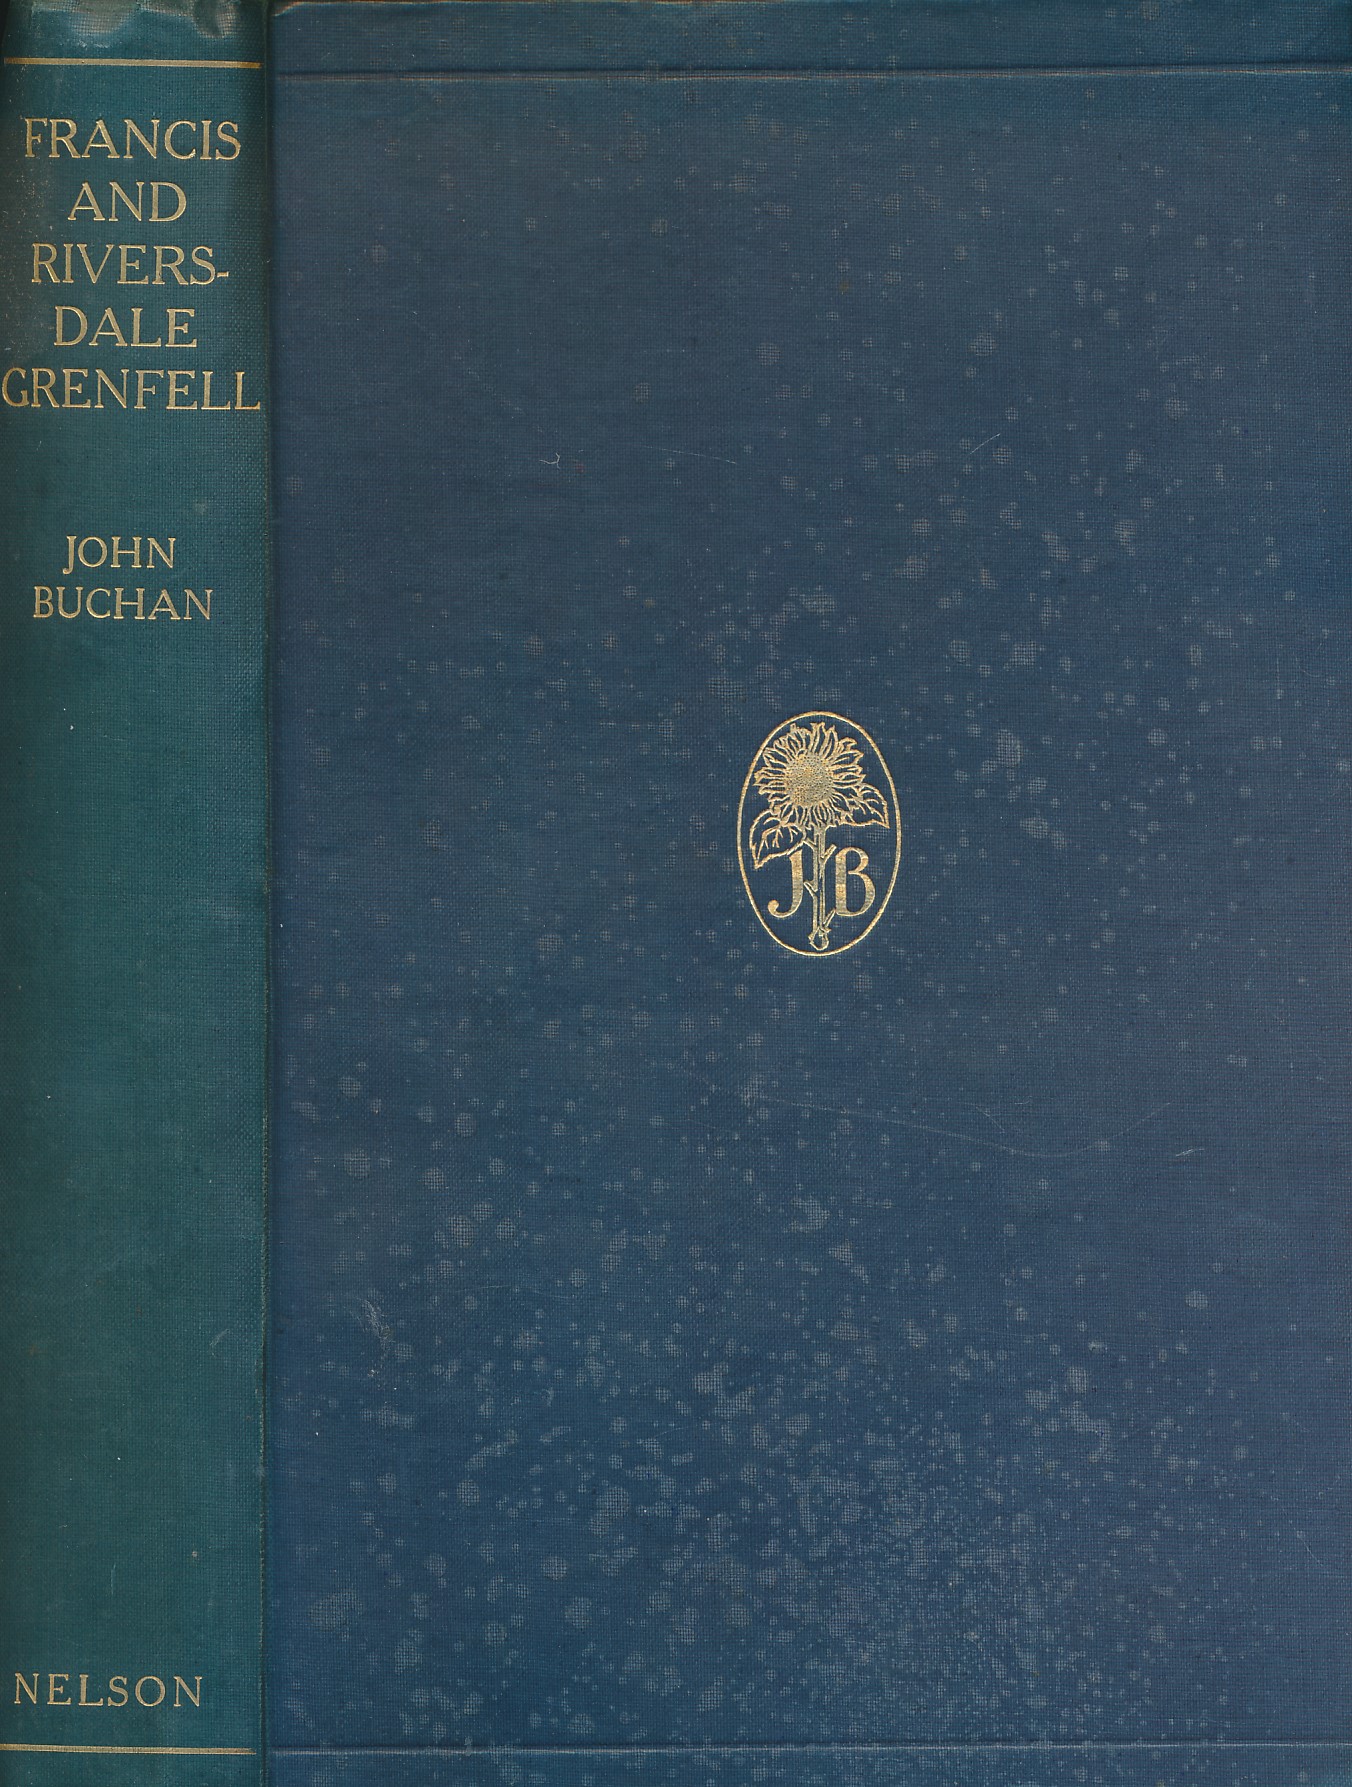 Francis and Riversdale Grenfell A Memoir